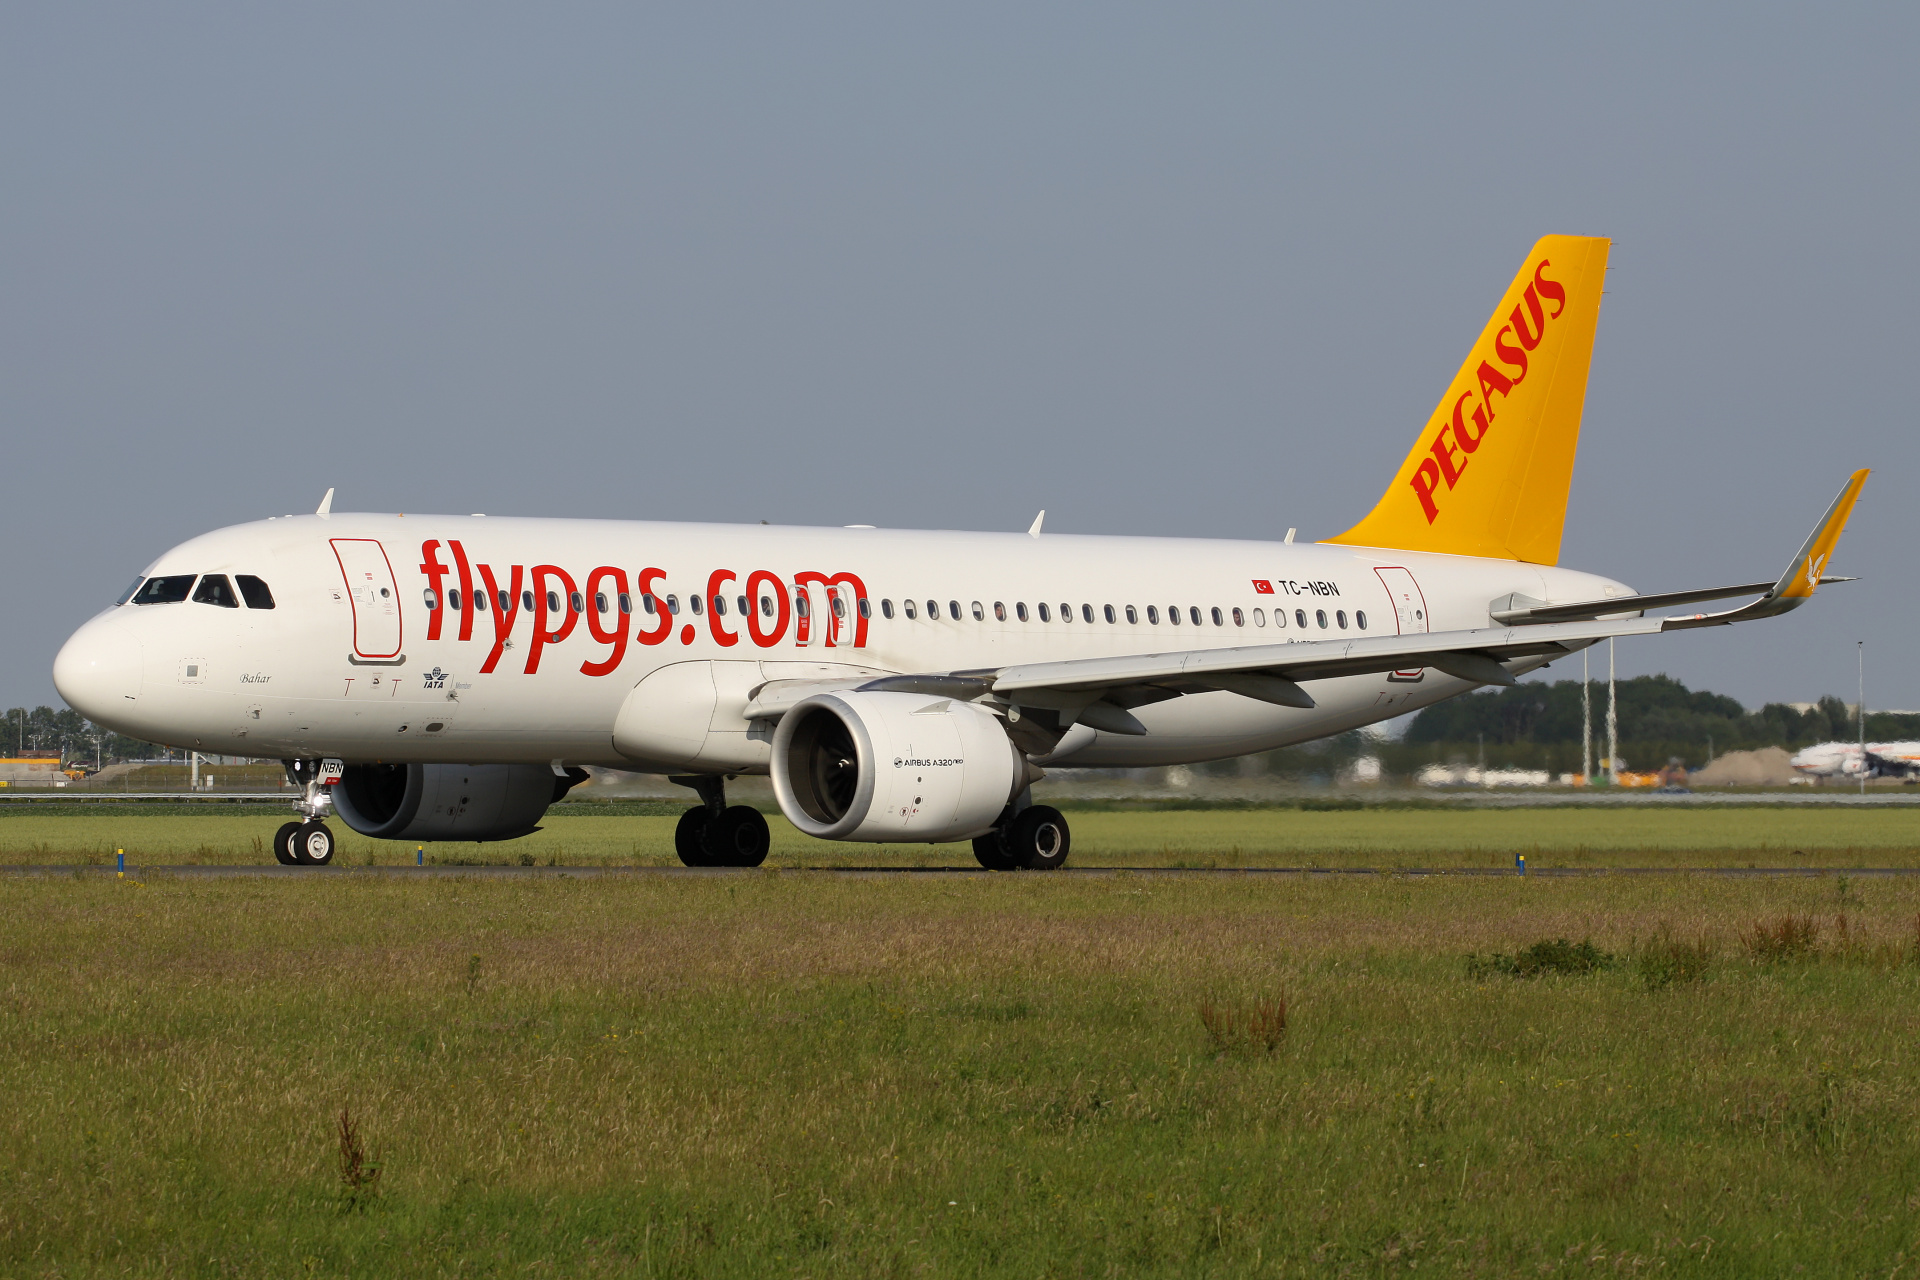 TC-NBN, Pegasus Airlines (Aircraft » Schiphol Spotting » Airbus A320neo)